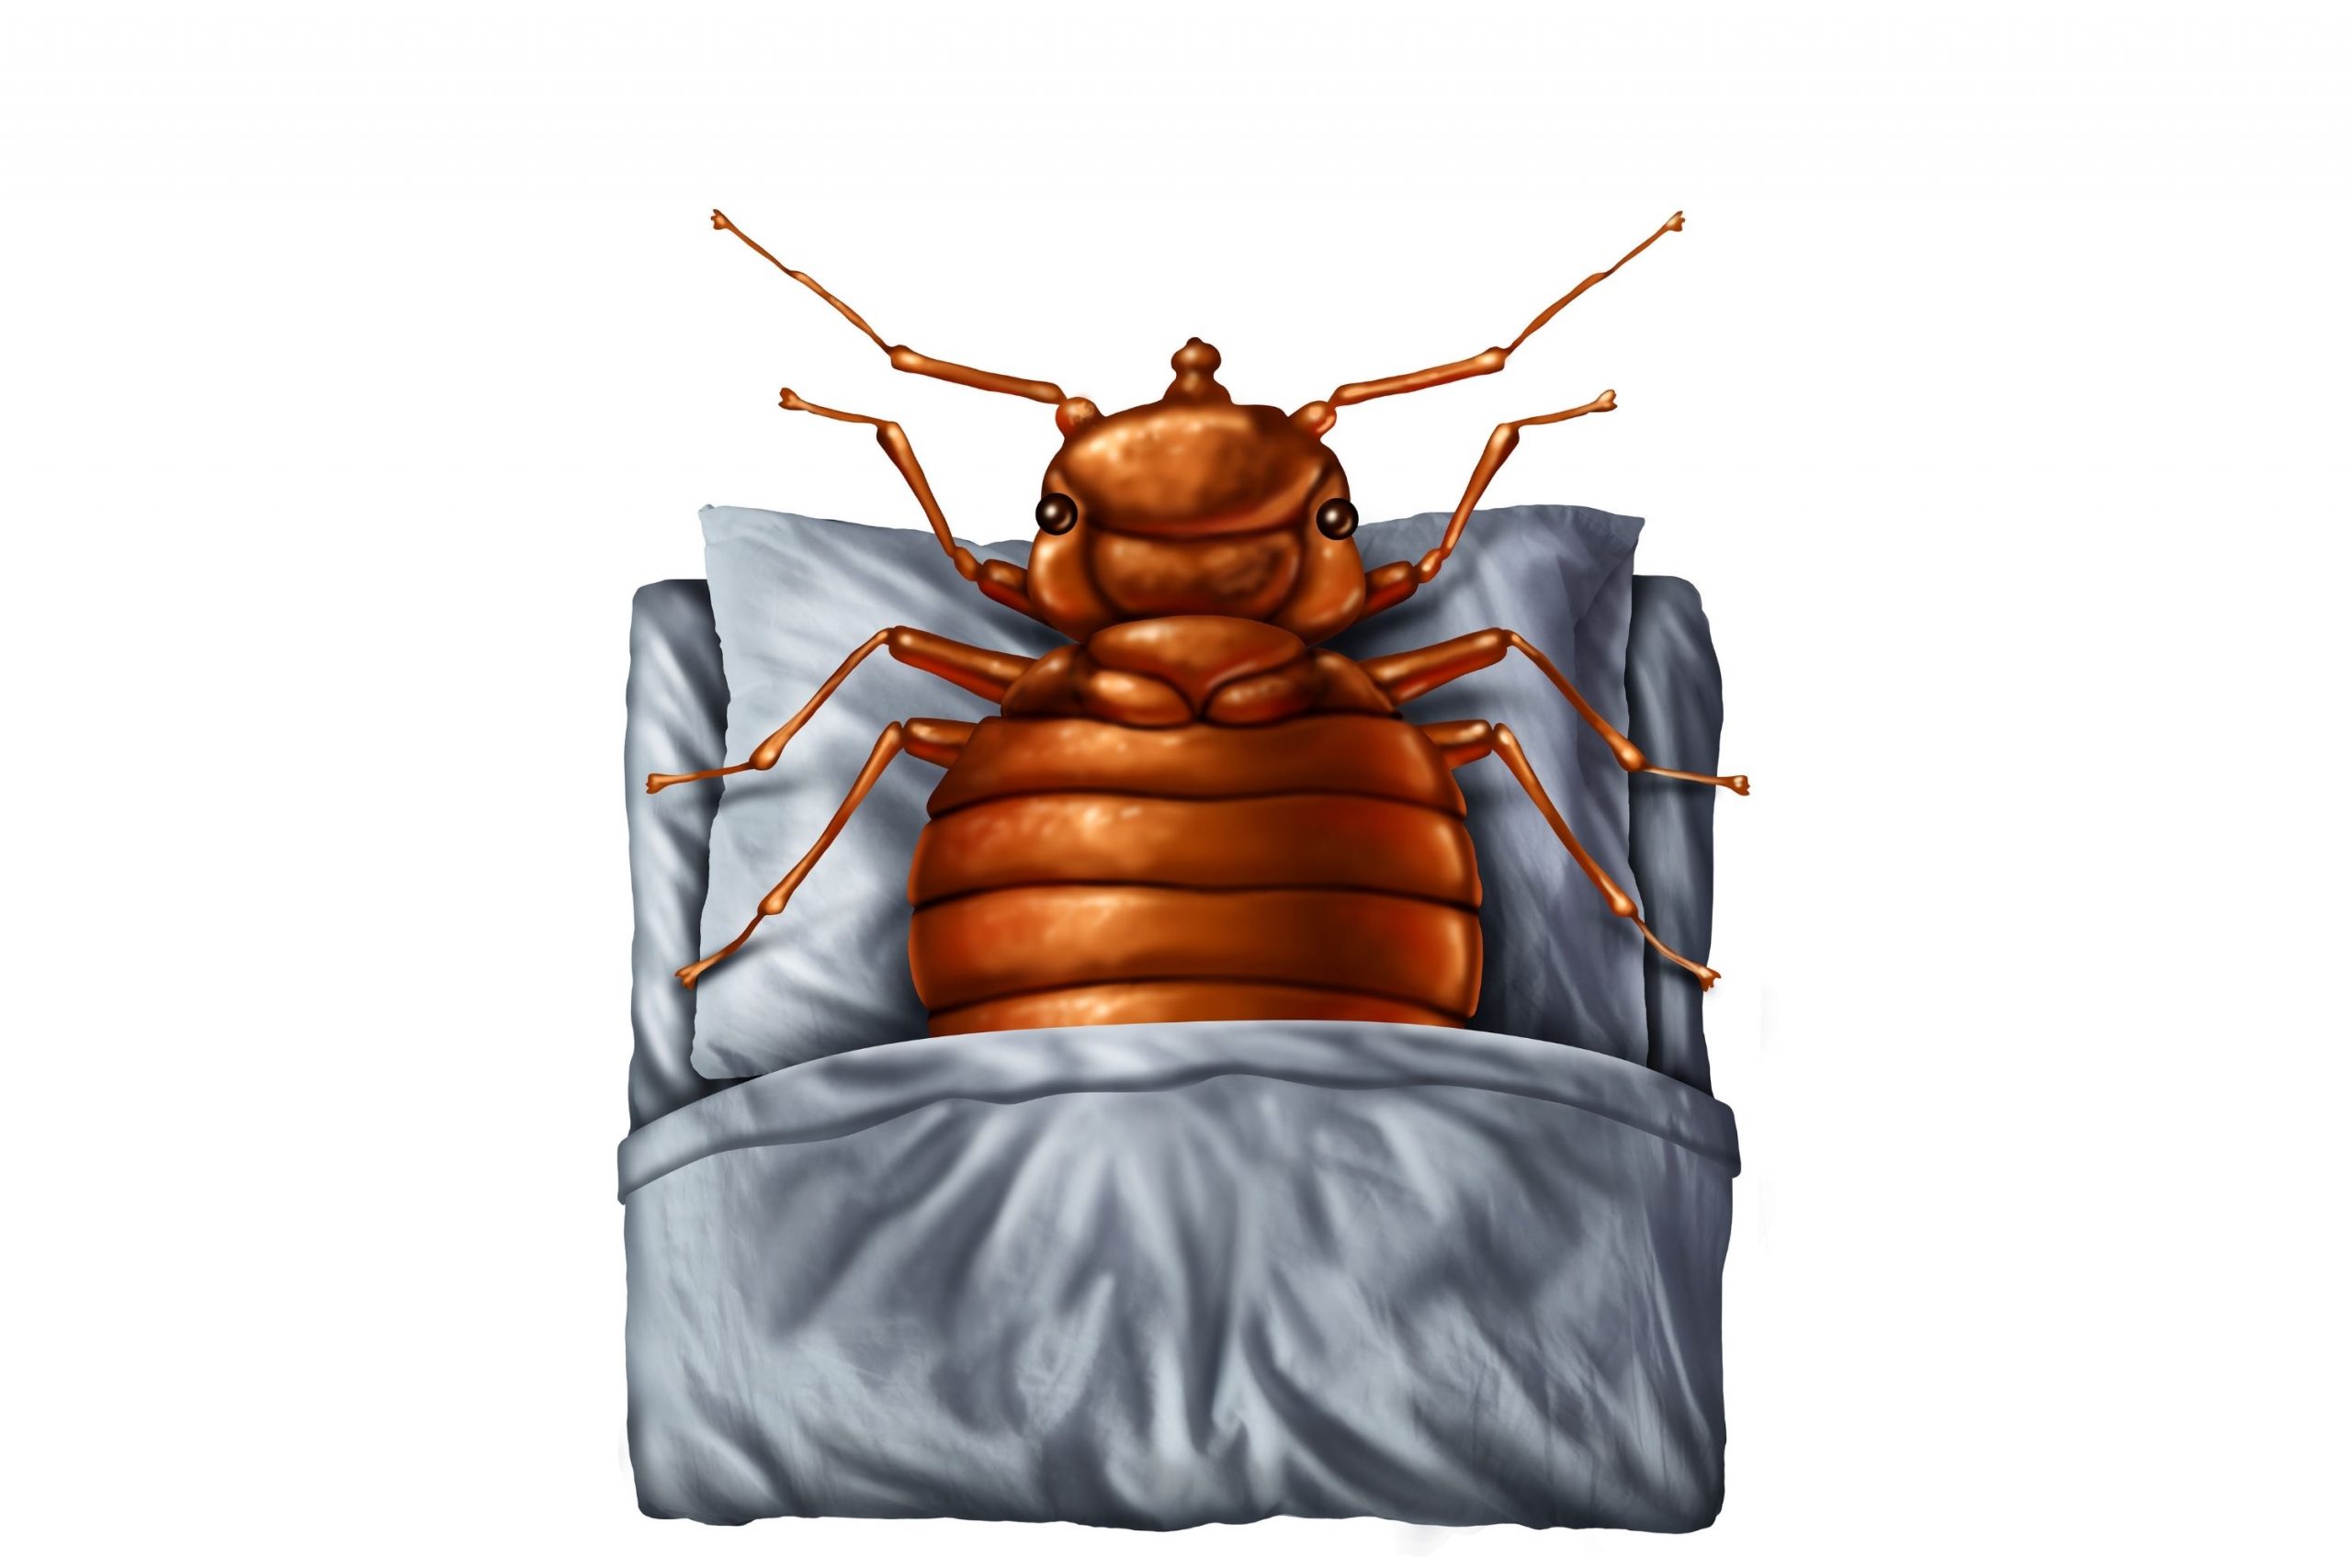 Major Myths About Bed Bugs Debunked!